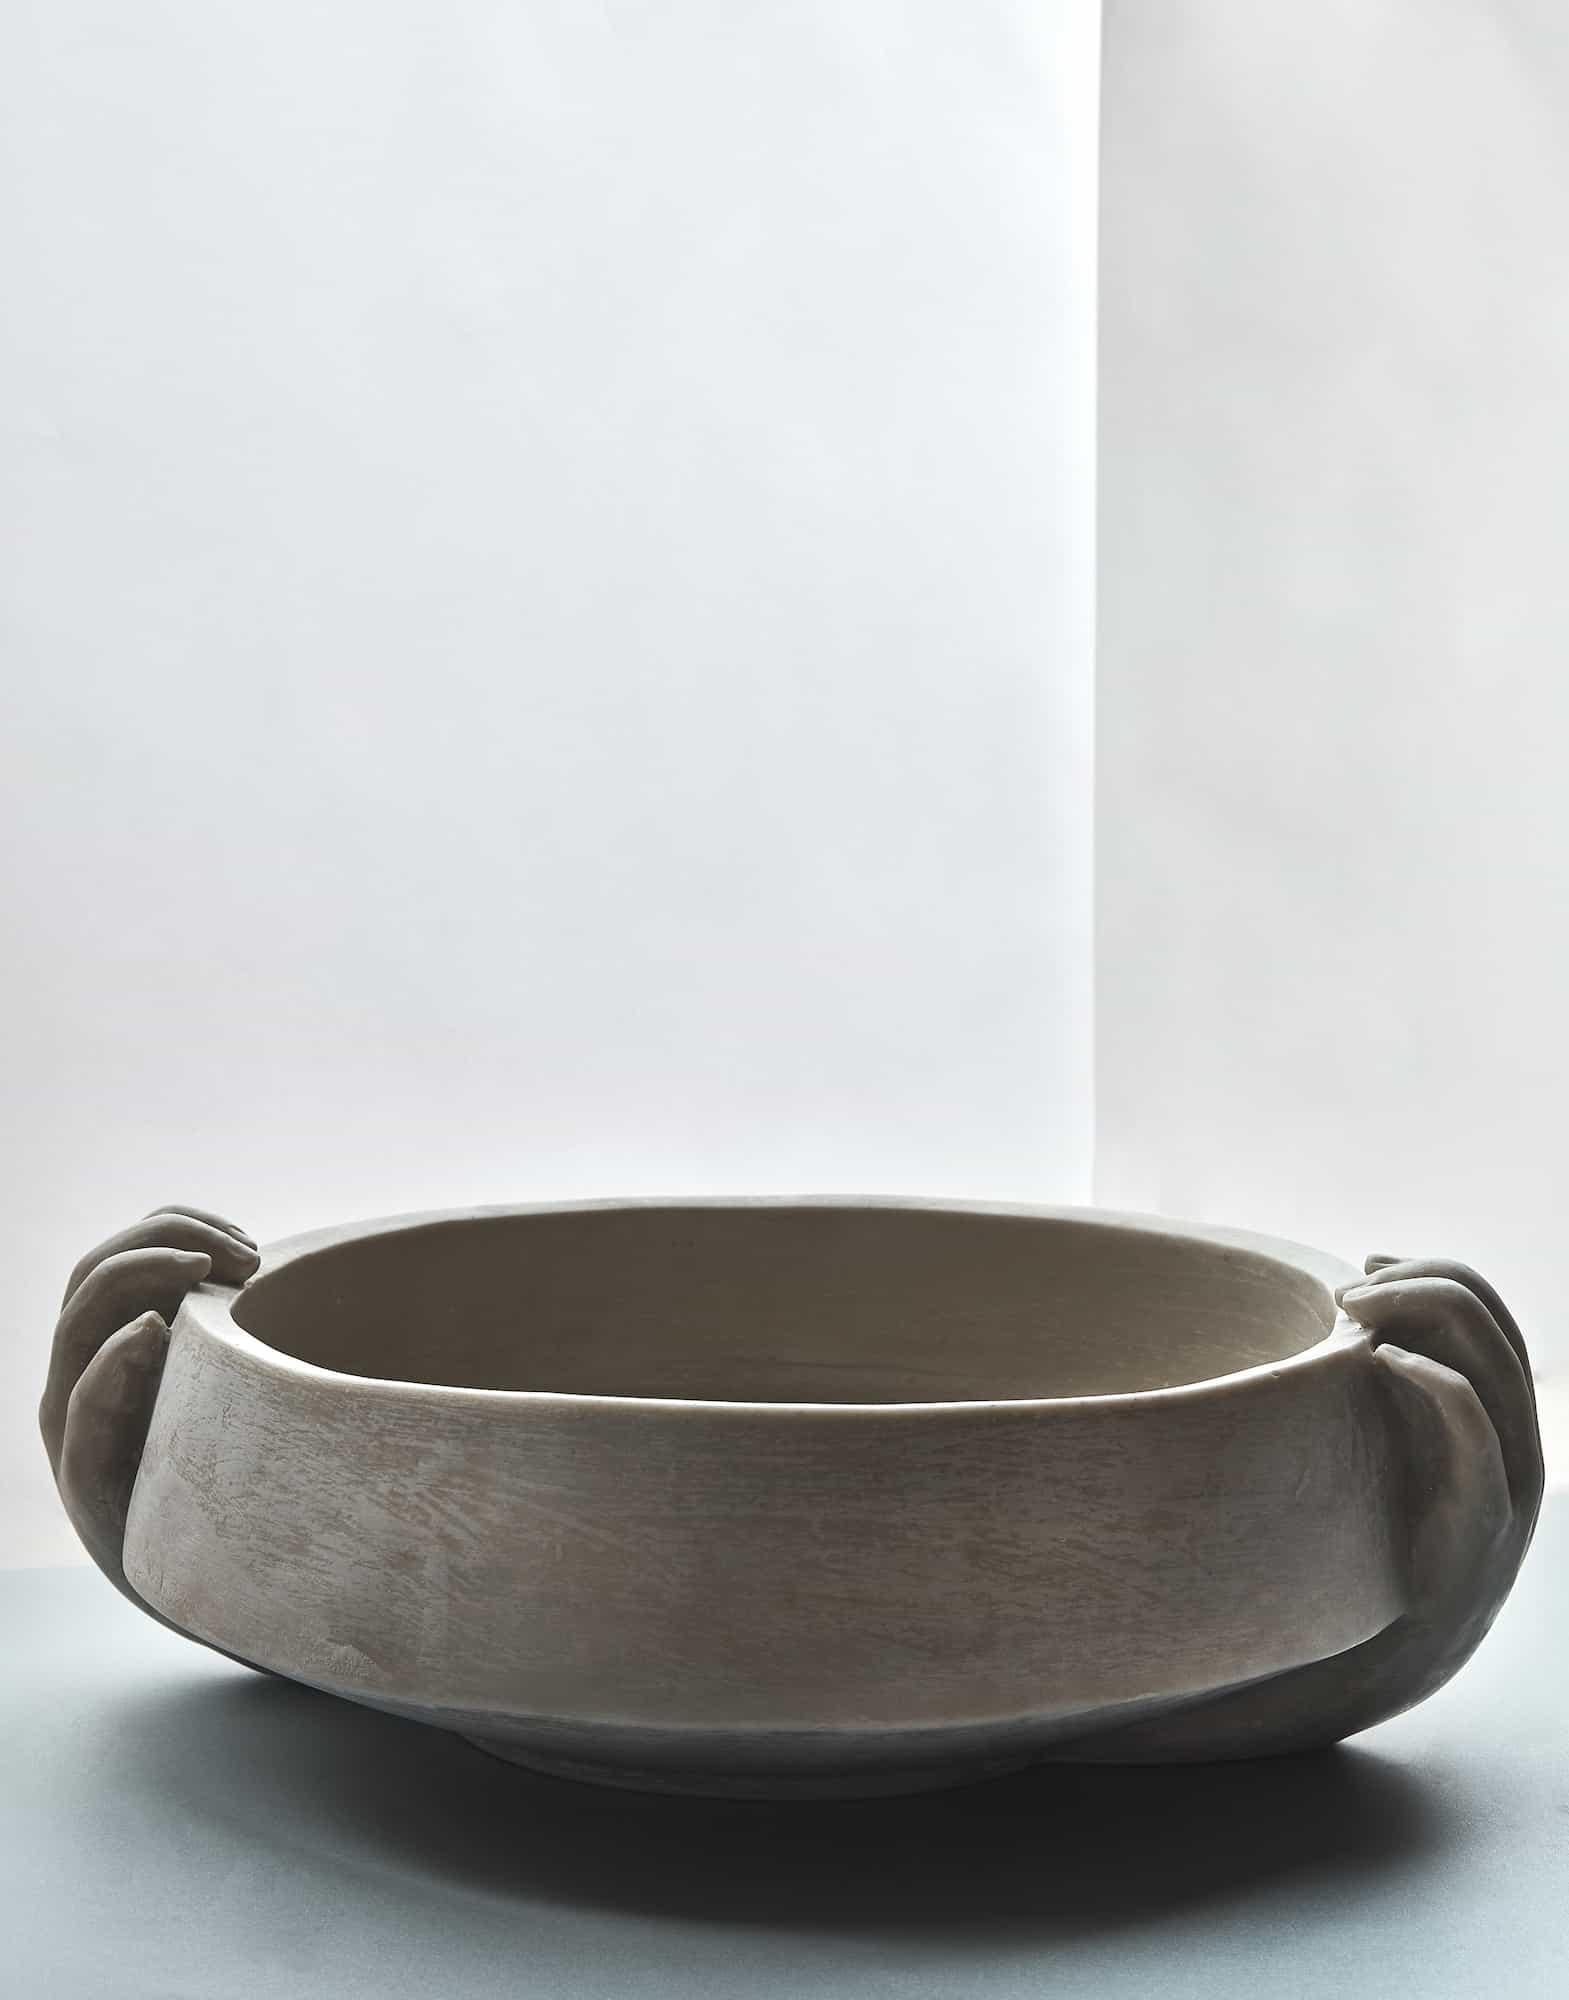 Set Of 2 Le Mani Bowls by Marcela Cure
Dimensions: W 42 x D 42 x H 15 cm
Materials: Resin and Stone Composite

The latest addition to our CORPOREA Collection is the Le Mani bowl. Given its round shape it can be used as a centerpiece elevating